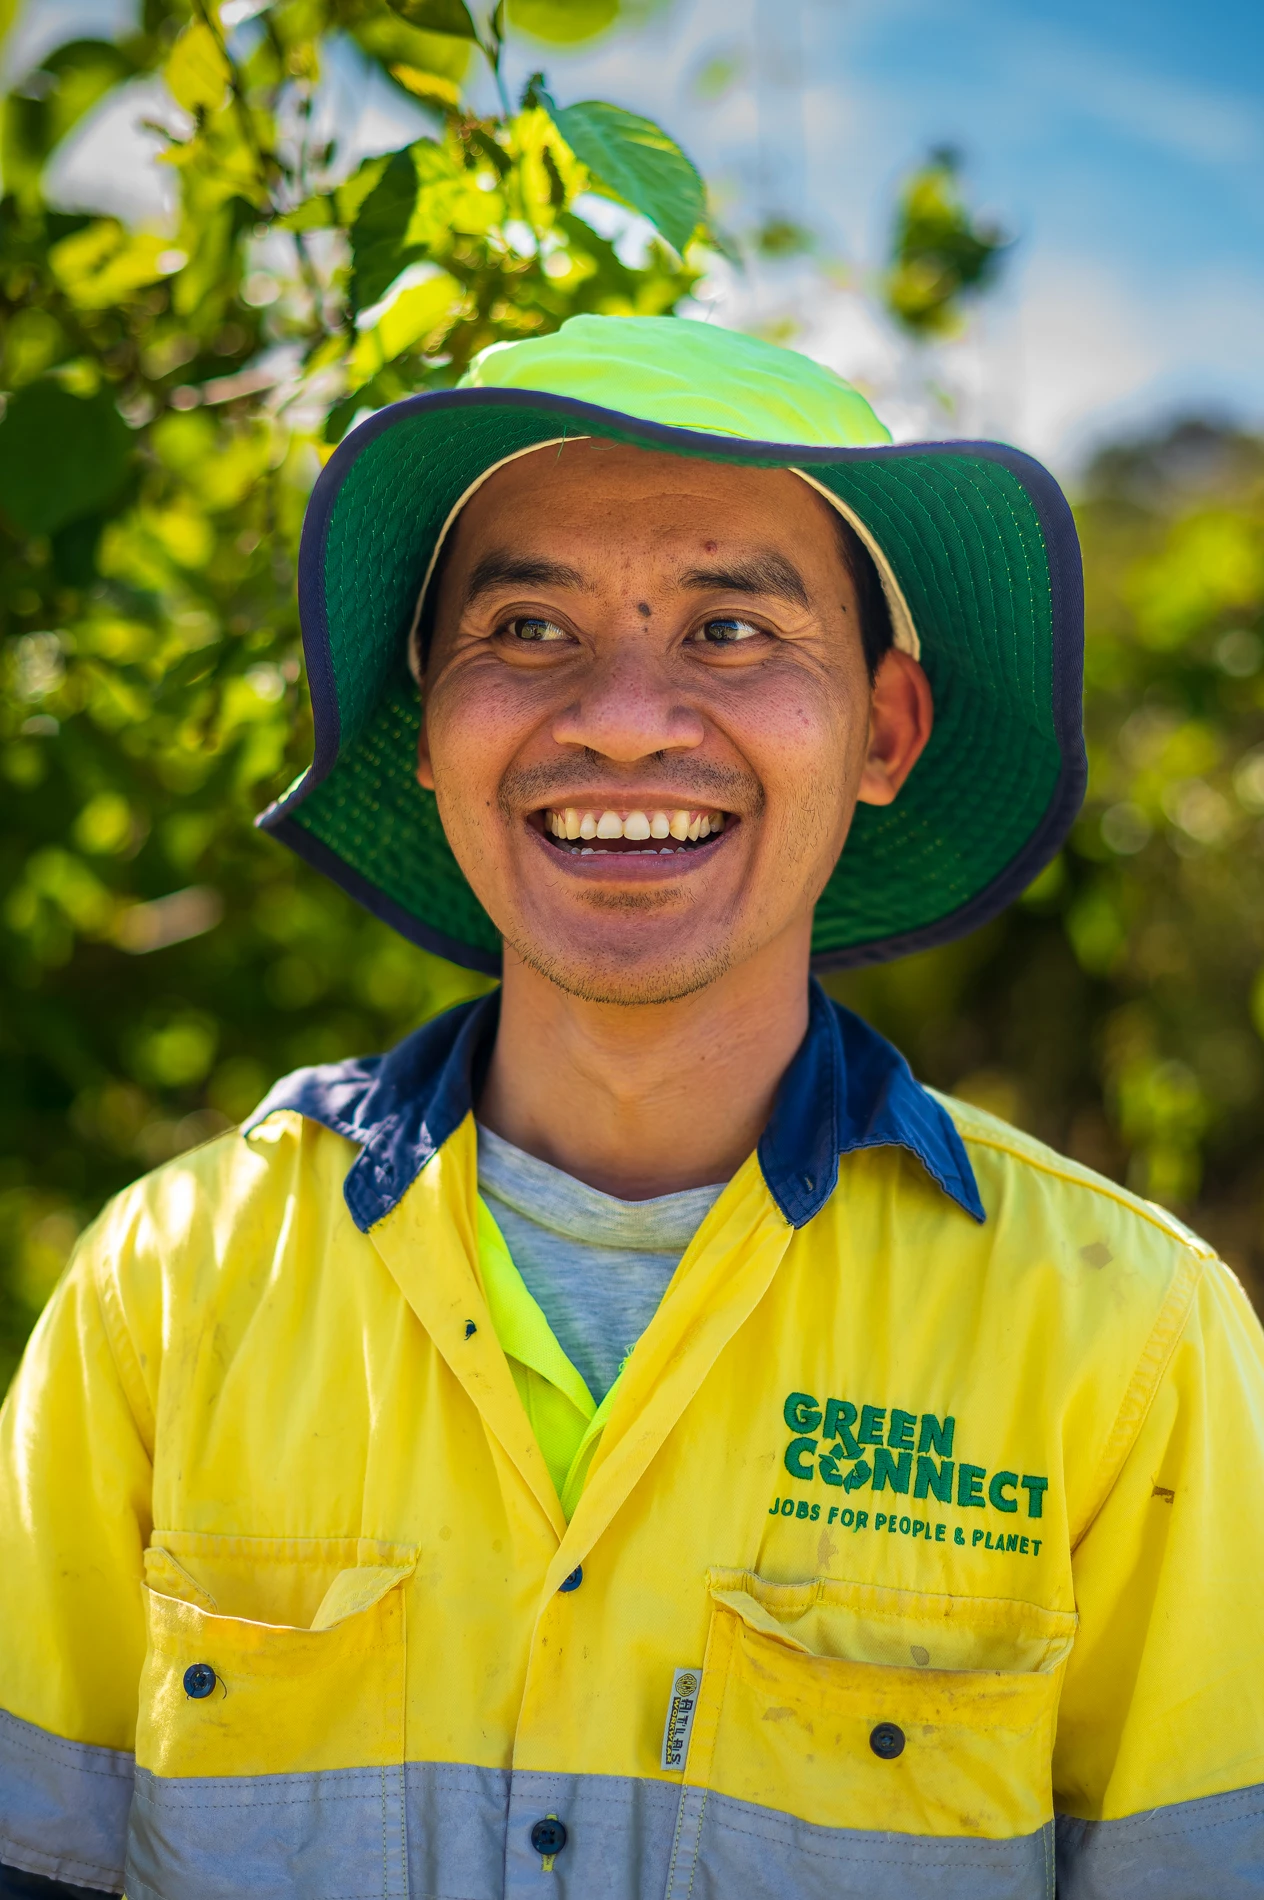 Post Green Connect Cover Image Volunteer Hat Looking Off Camera